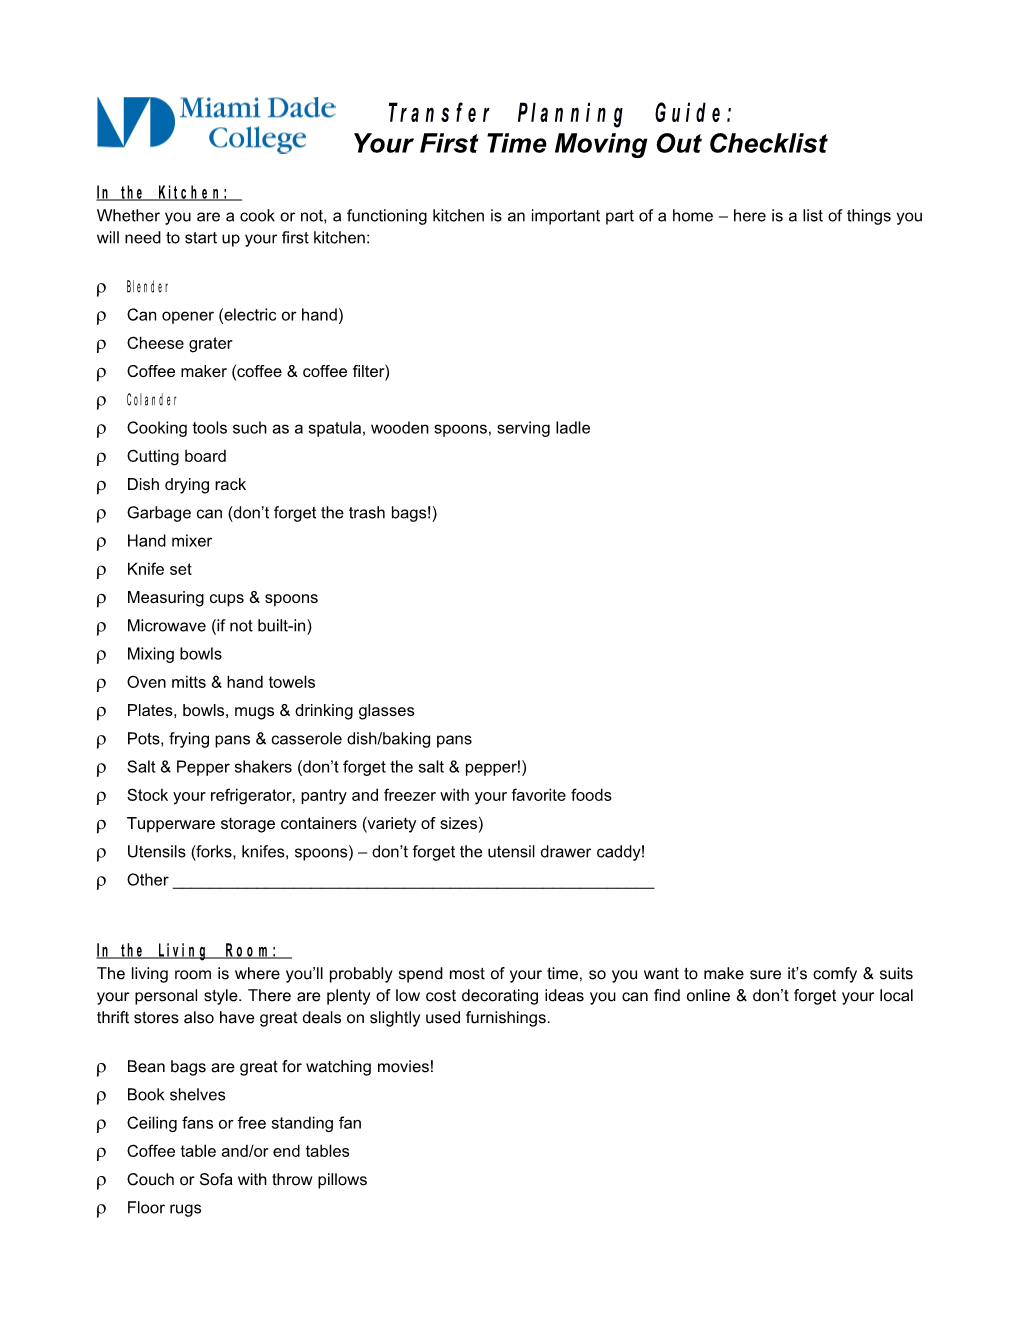 Your First Time Moving out Checklist